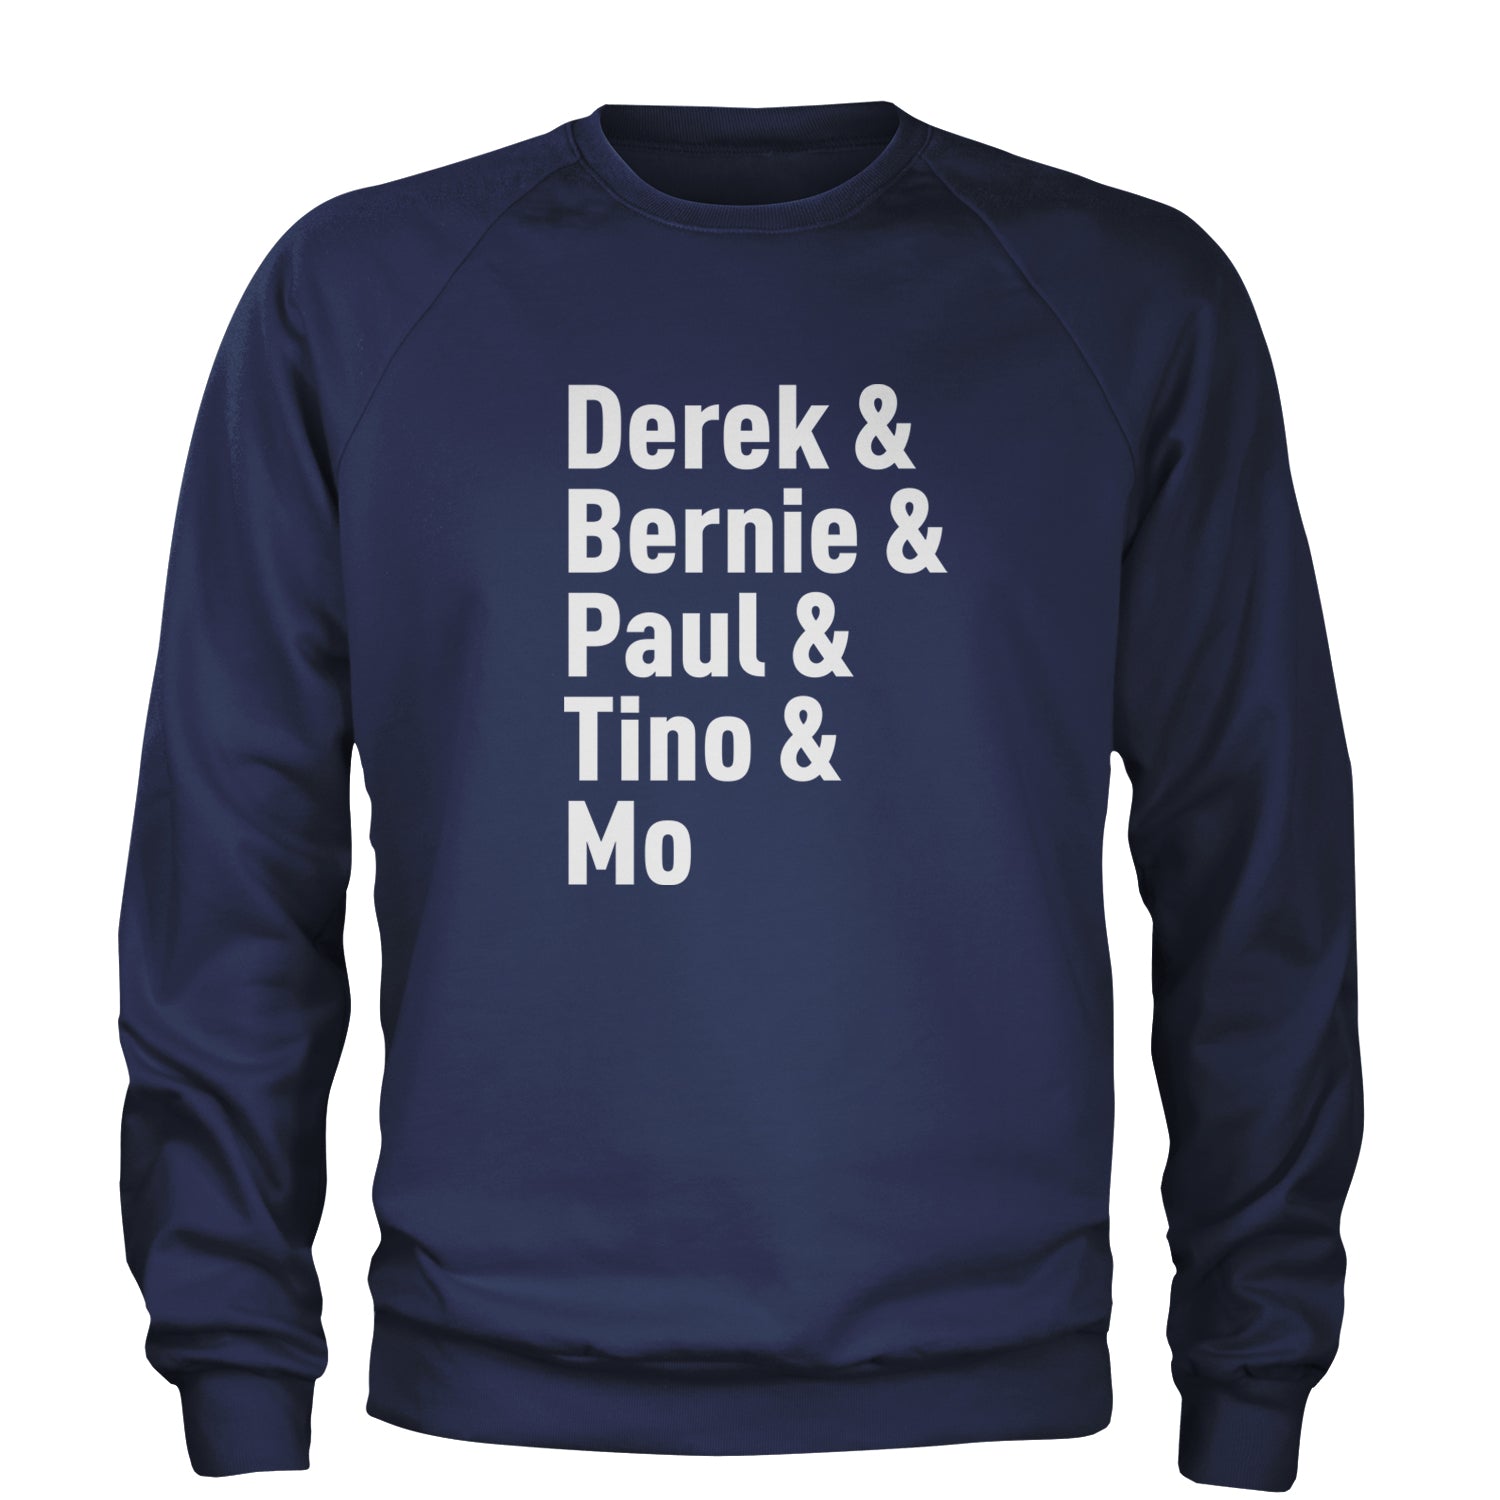 Derek and Bernie and Paul and Tino and Mo Adult Crewneck Sweatshirt baseball, comes, here, judge, the by Expression Tees